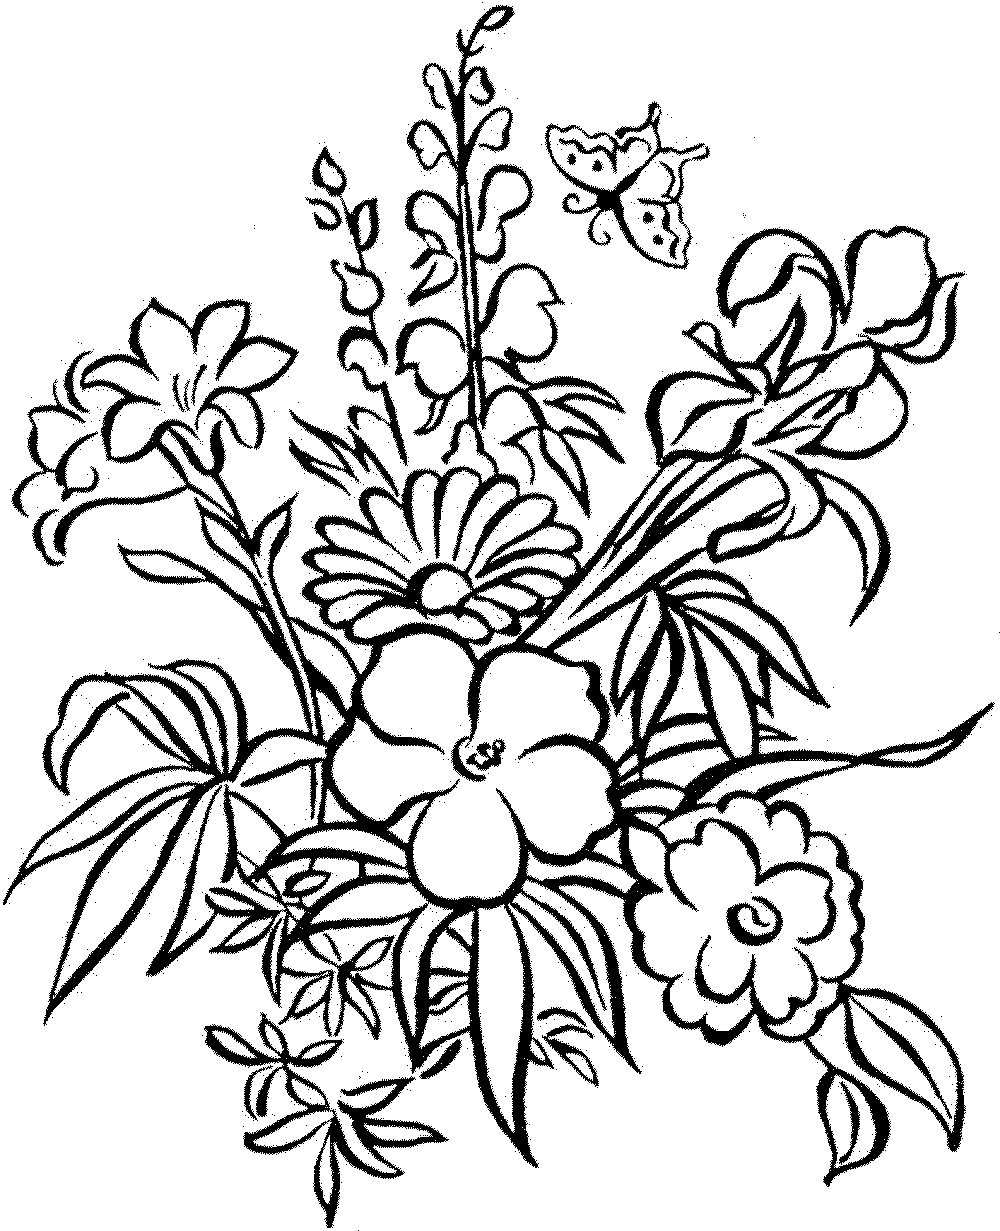 Impressive Printable Flower Coloring Pages For Adults 20 20 ...